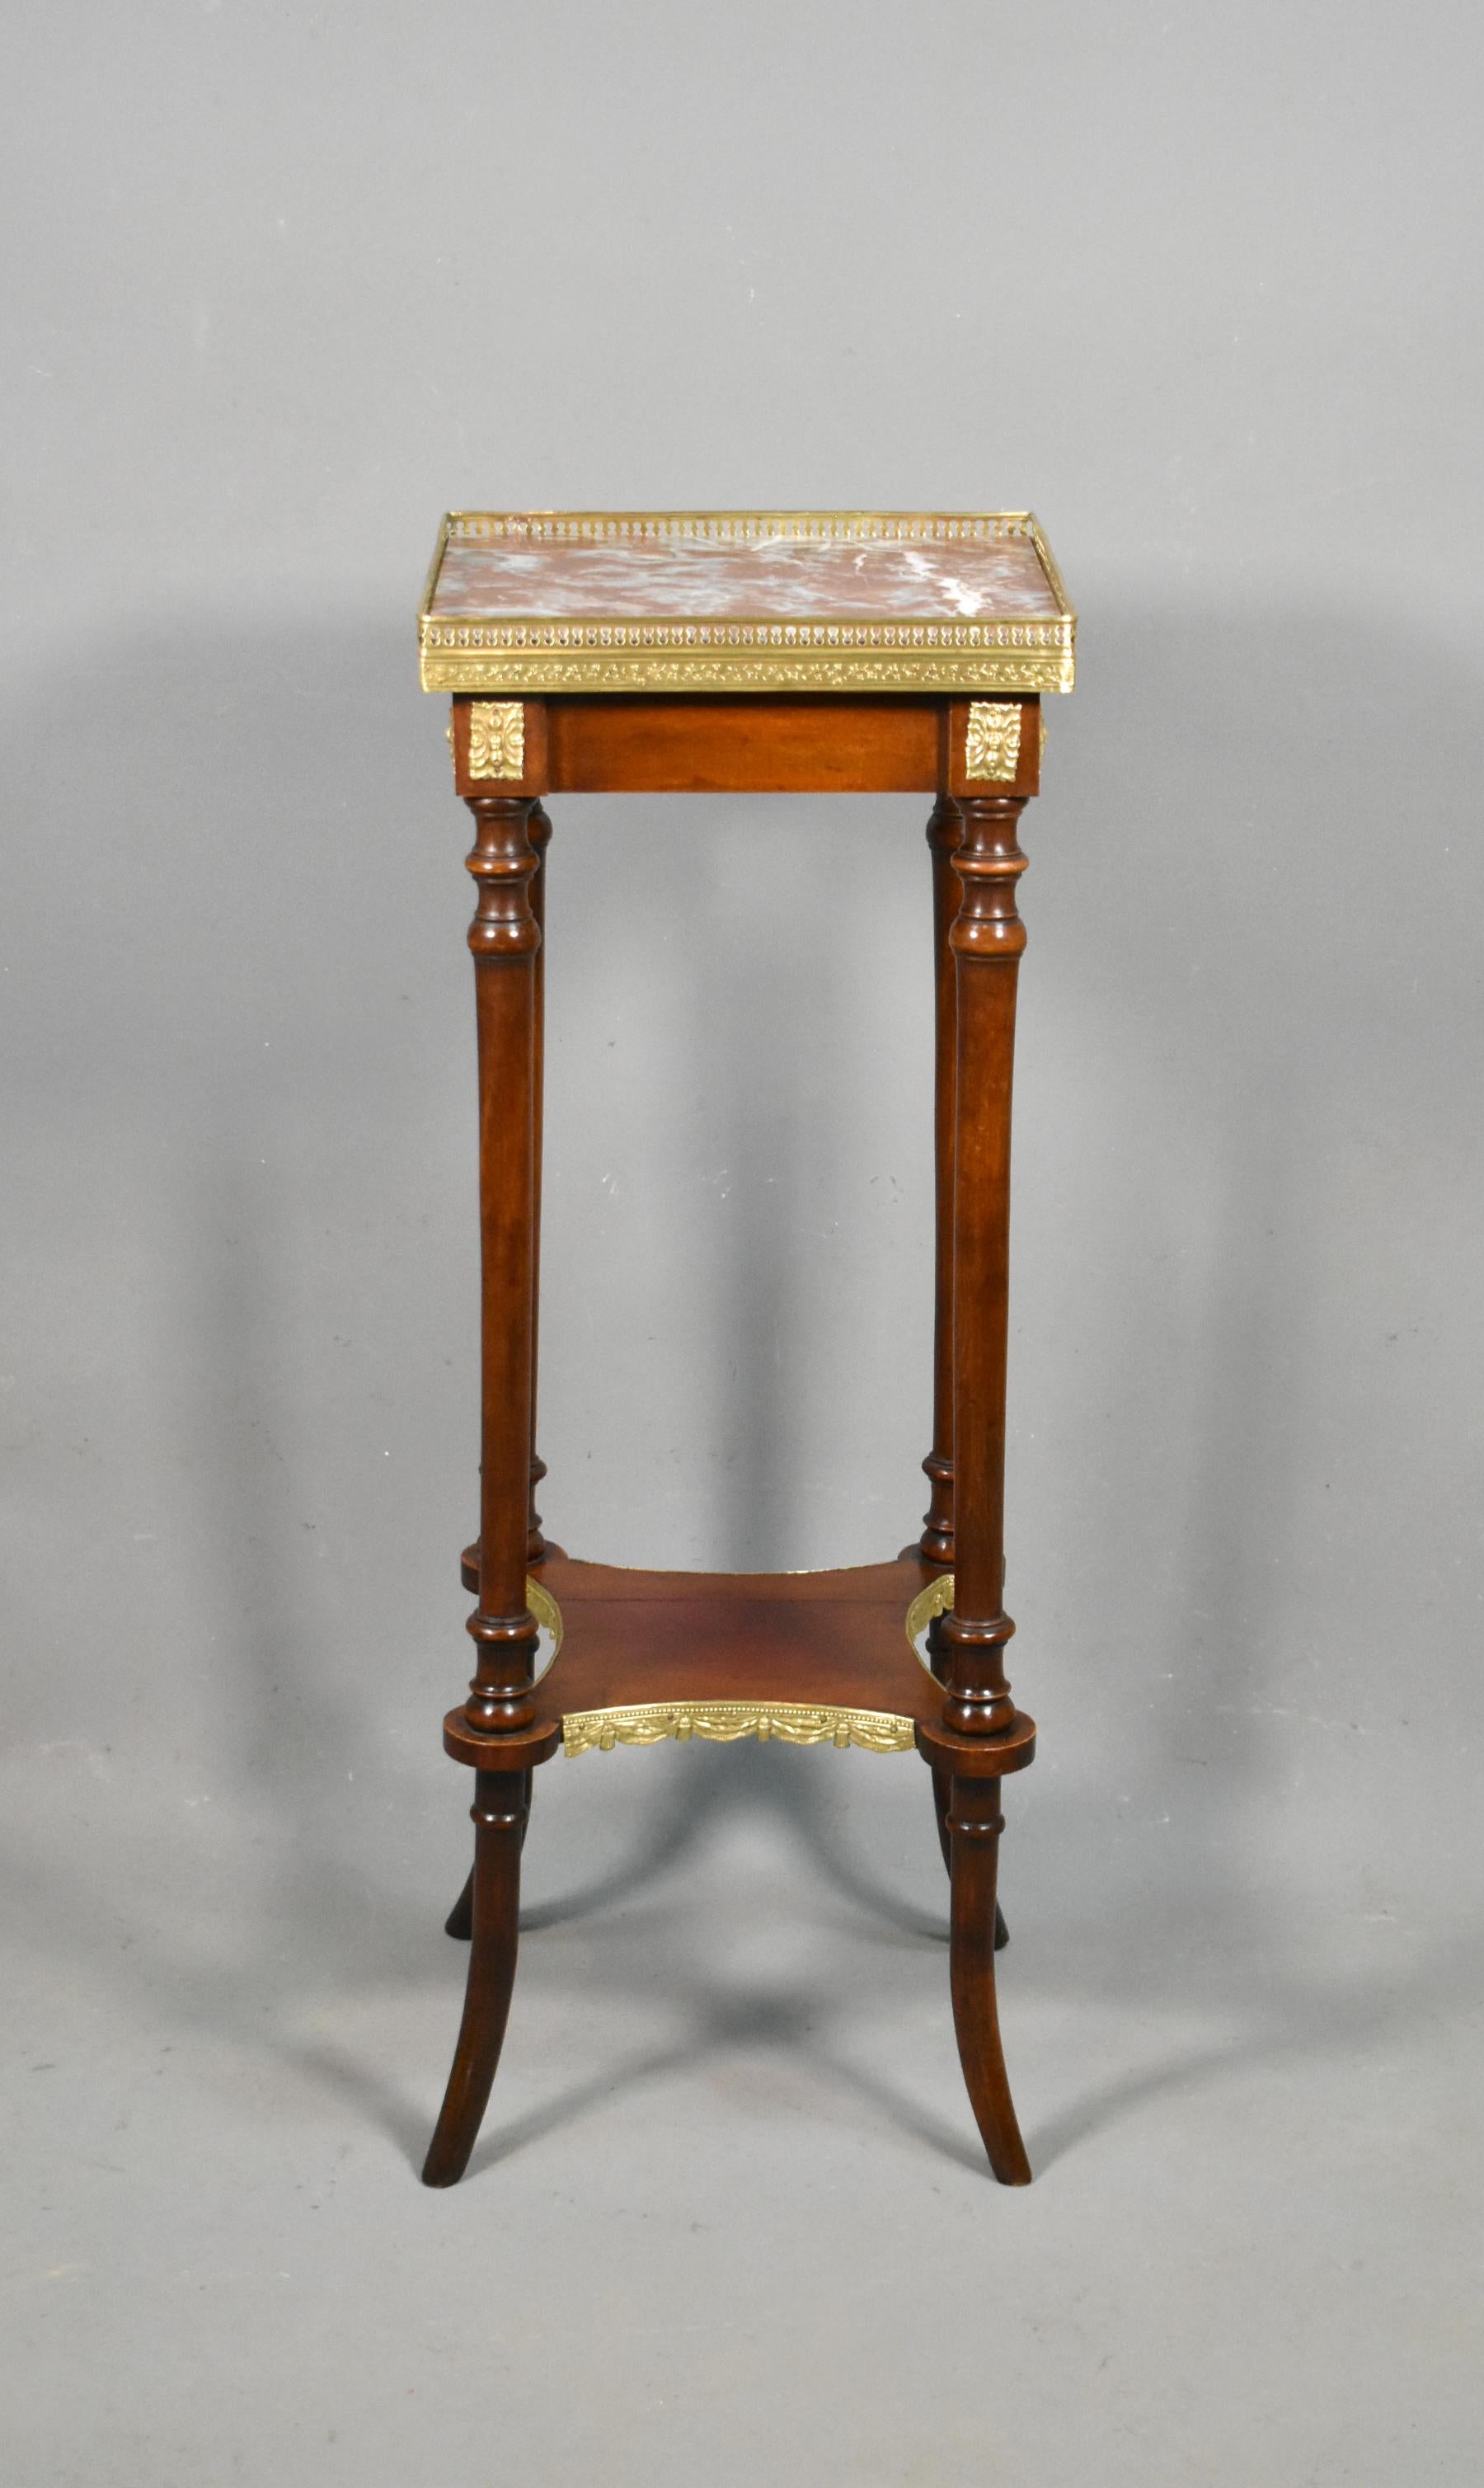 Antique French side table Louis XVI style.

A delightful French centre table featuring a red and white marble top surrounded by a pierced brass gallery with floral decoration. 

The piece has finely turned legs leading down to a delicately